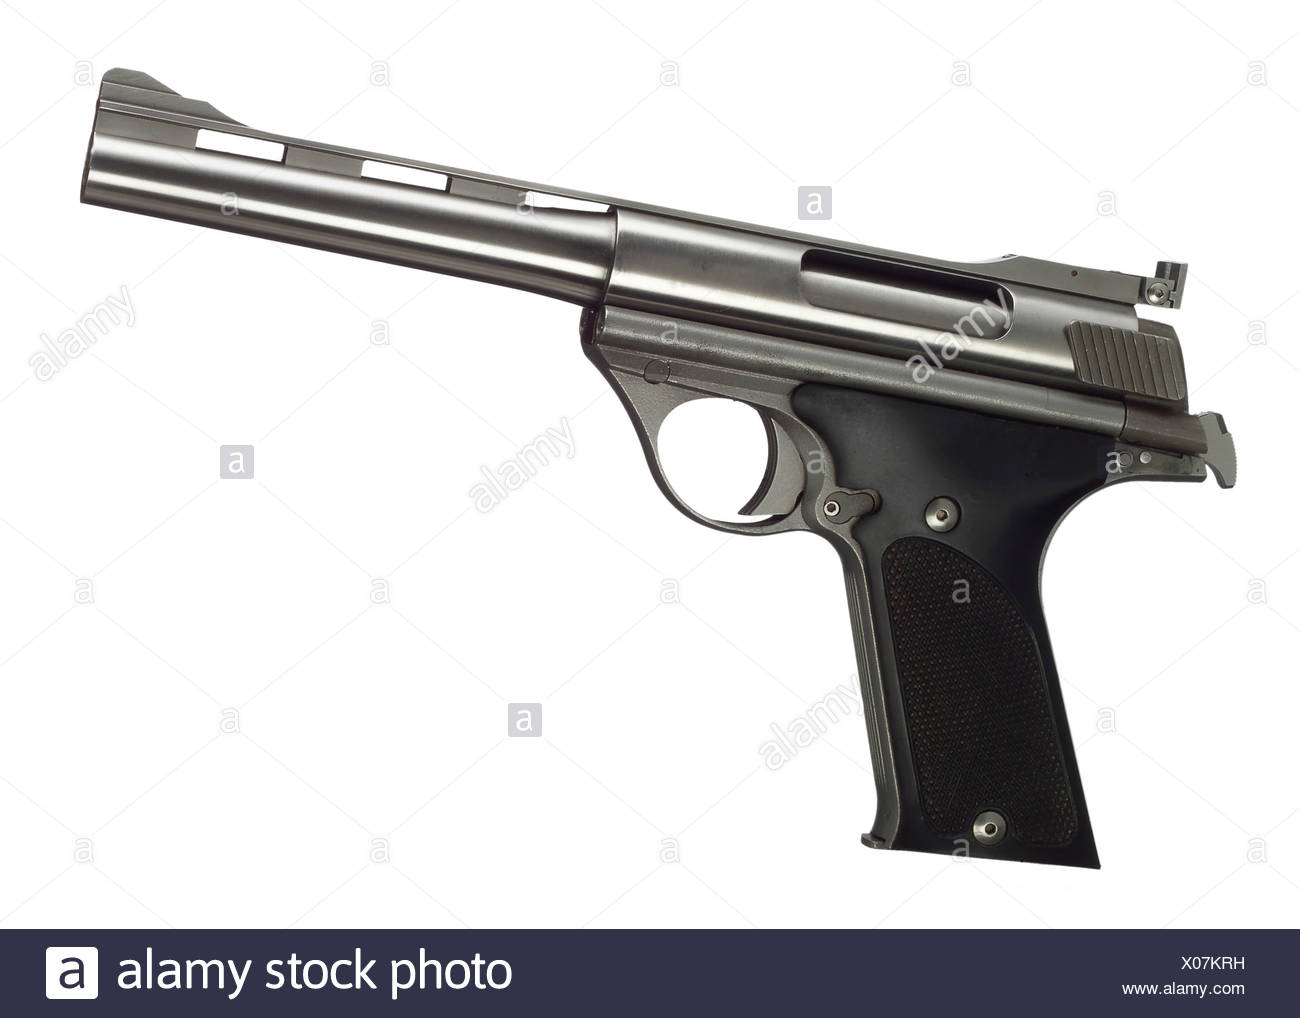 Close Up Of 44 Magnum Revolver Against White Background Stock